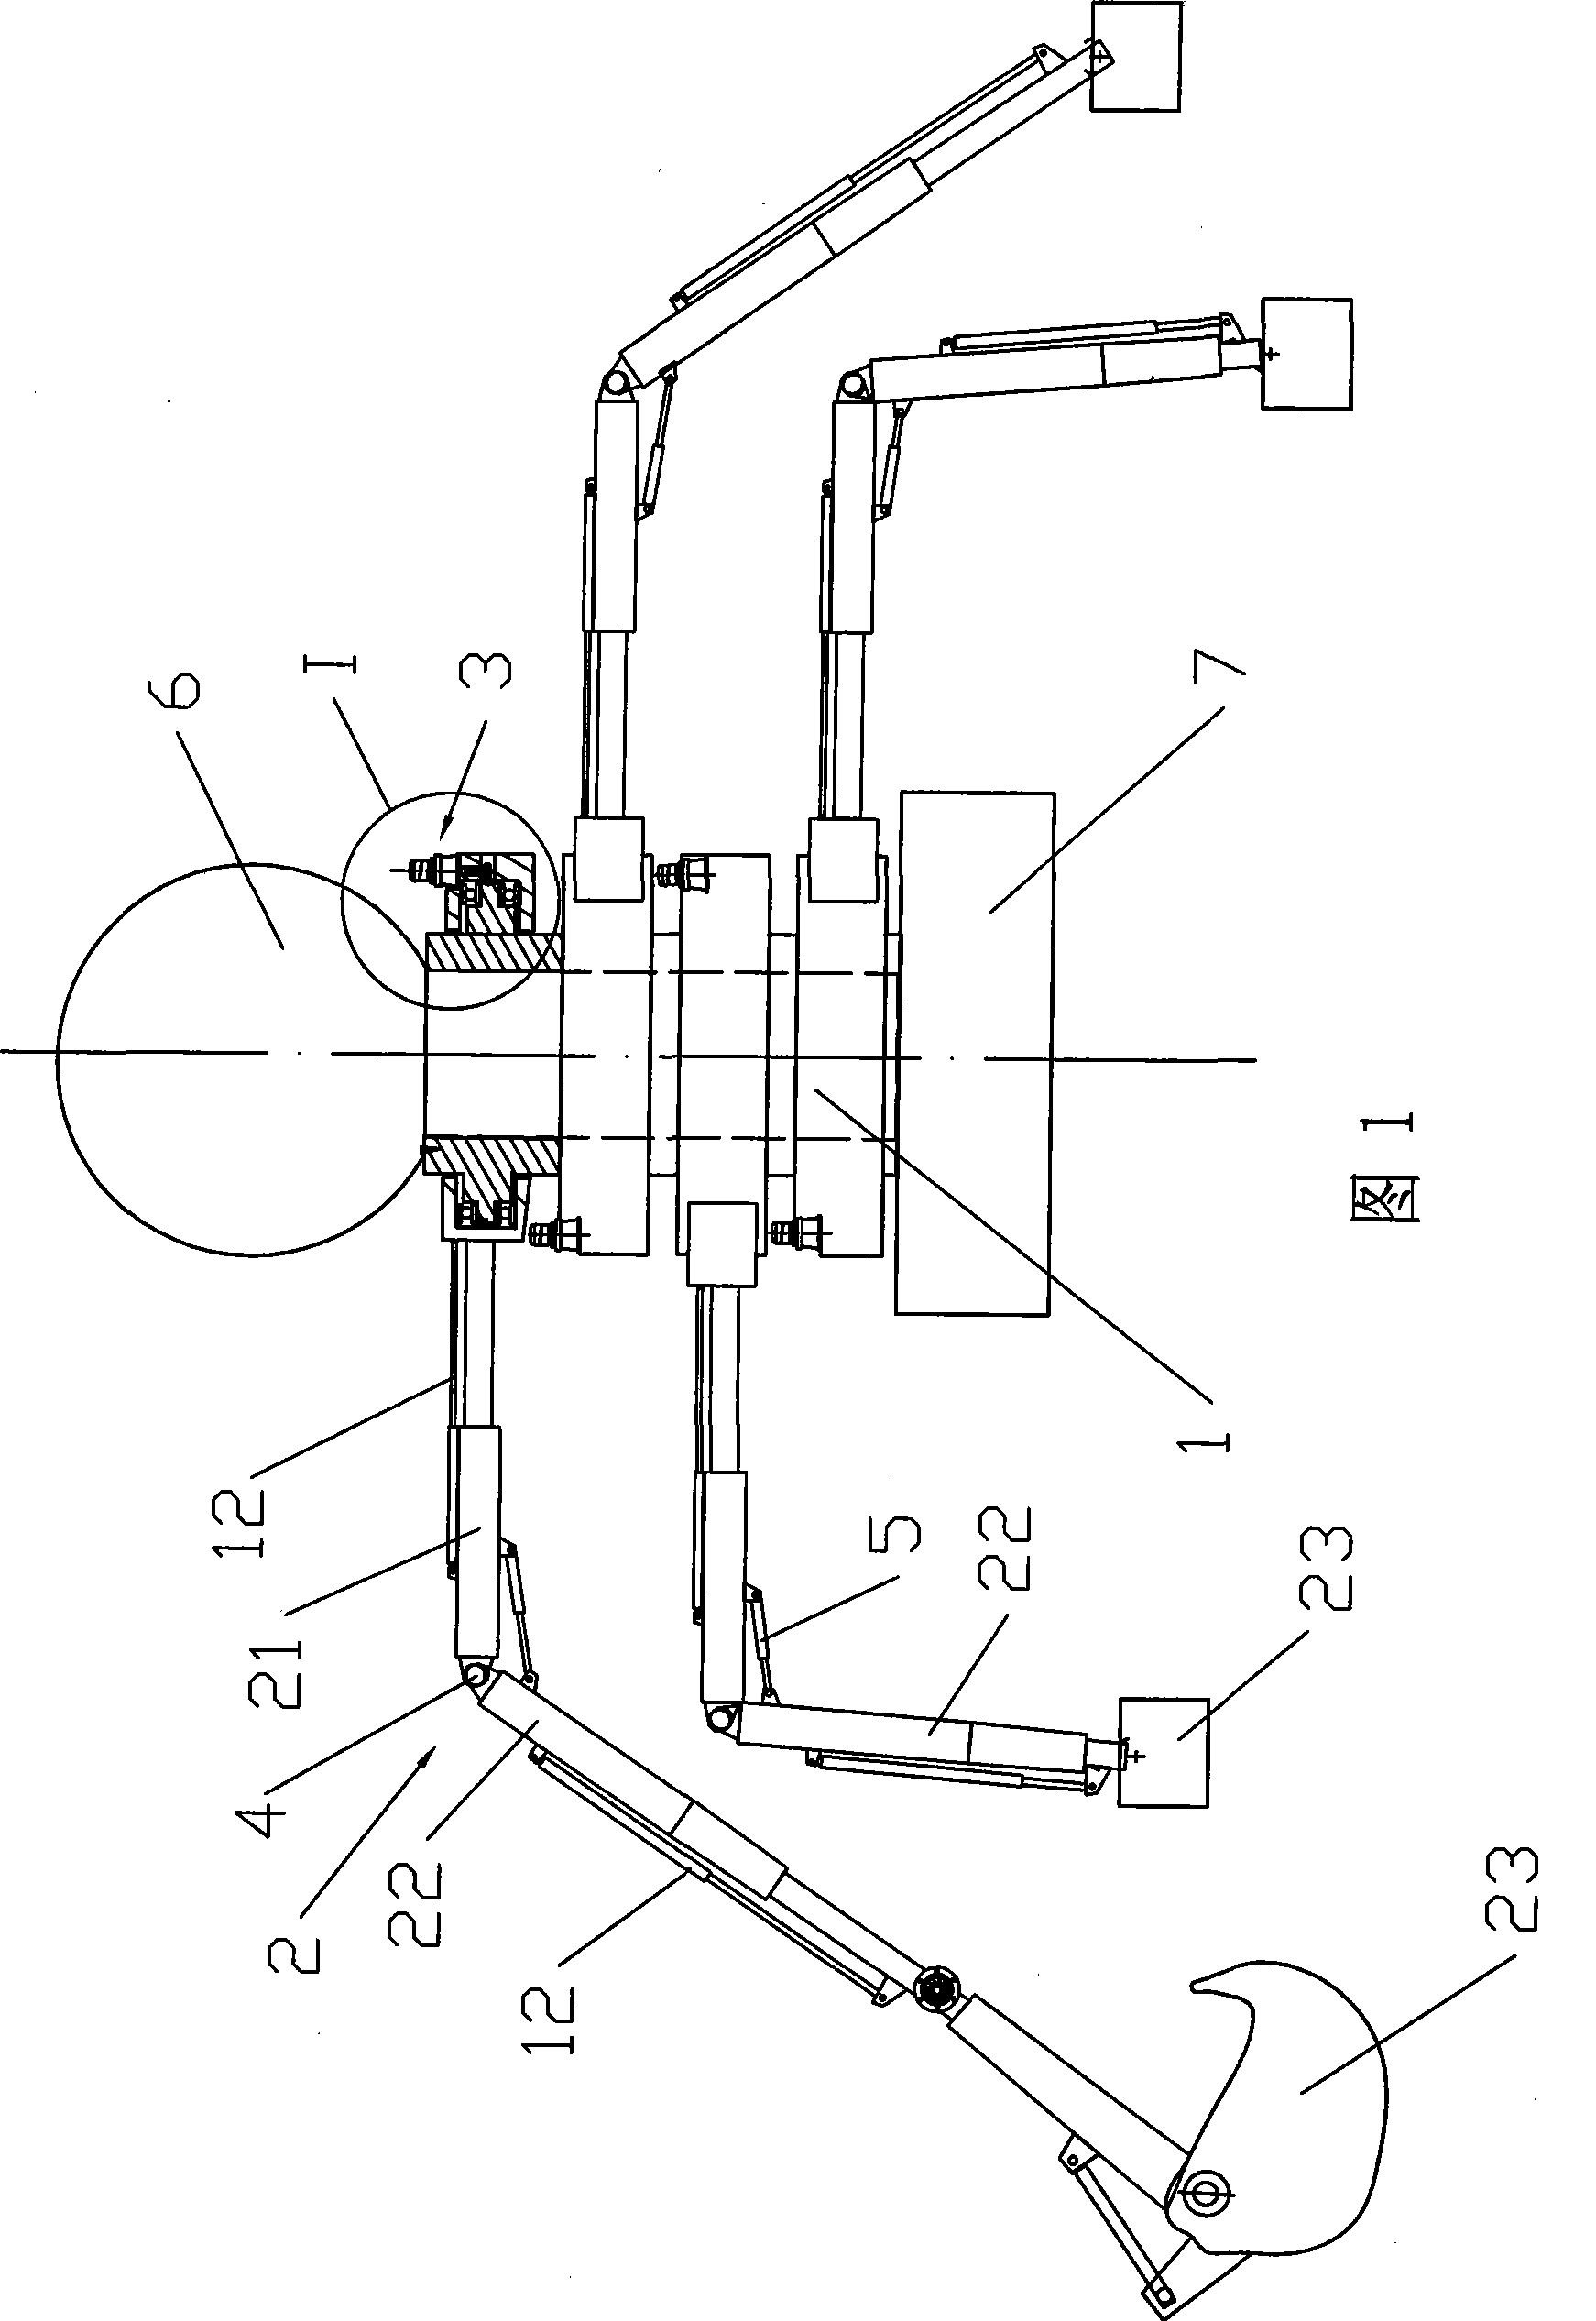 Robot with single-rotation axis and multi-expansion leg